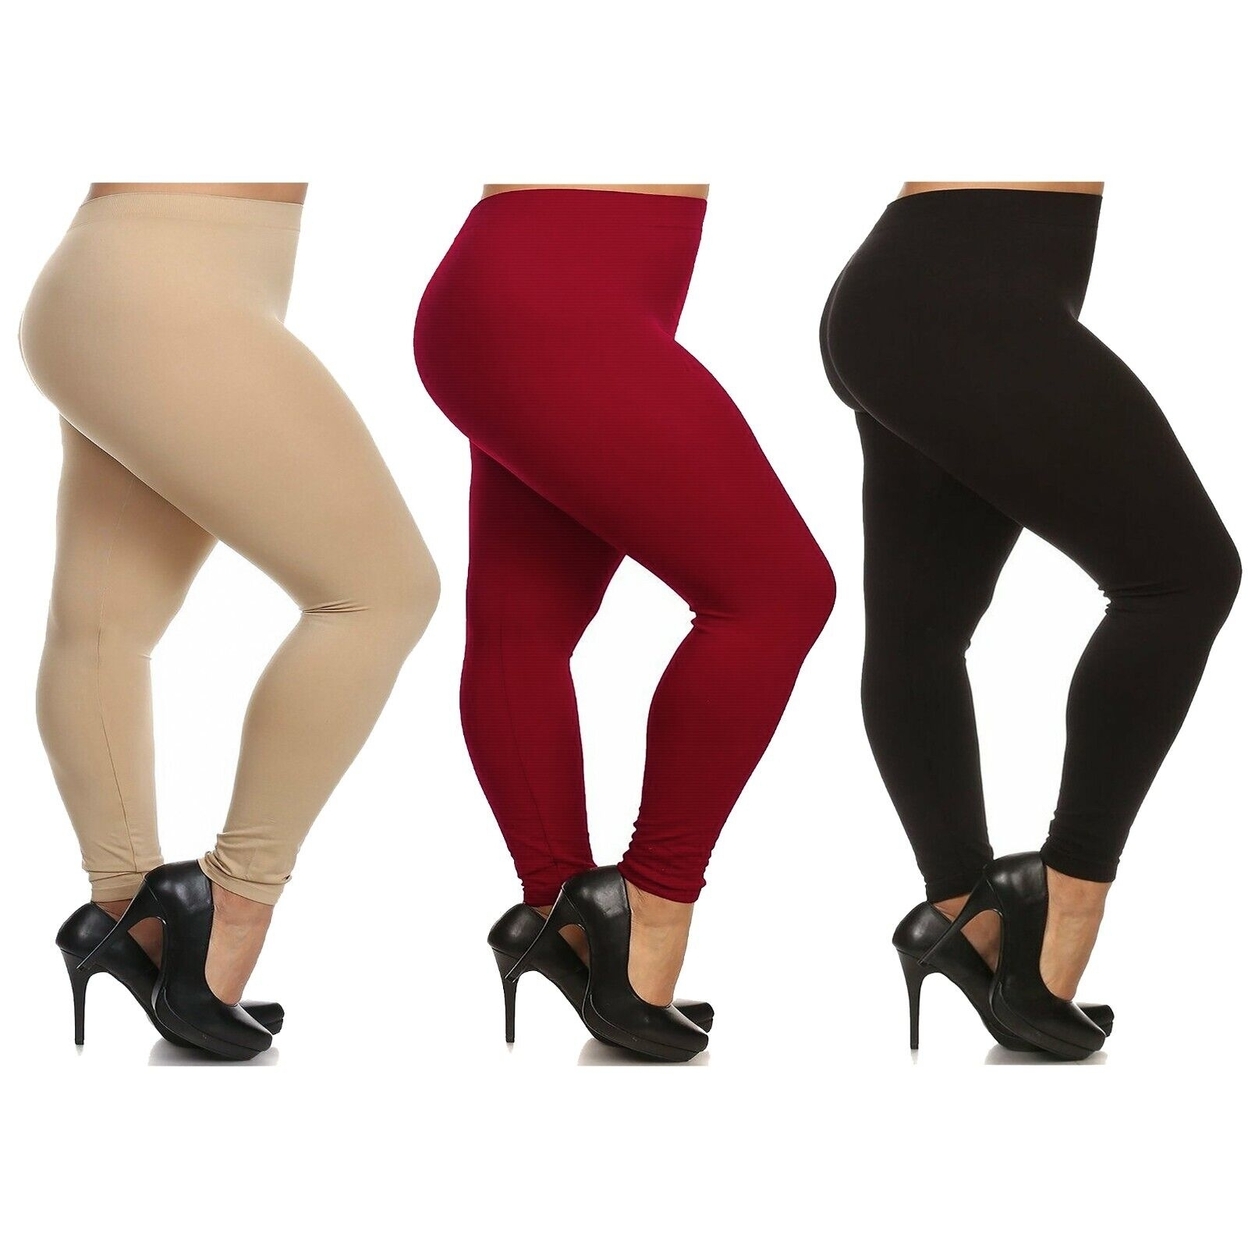 3-Pack: Women's Casual Ultra-Soft Smooth High Waisted Athletic Active Yoga Leggings Plus Size Available - Black,black,black, 1x